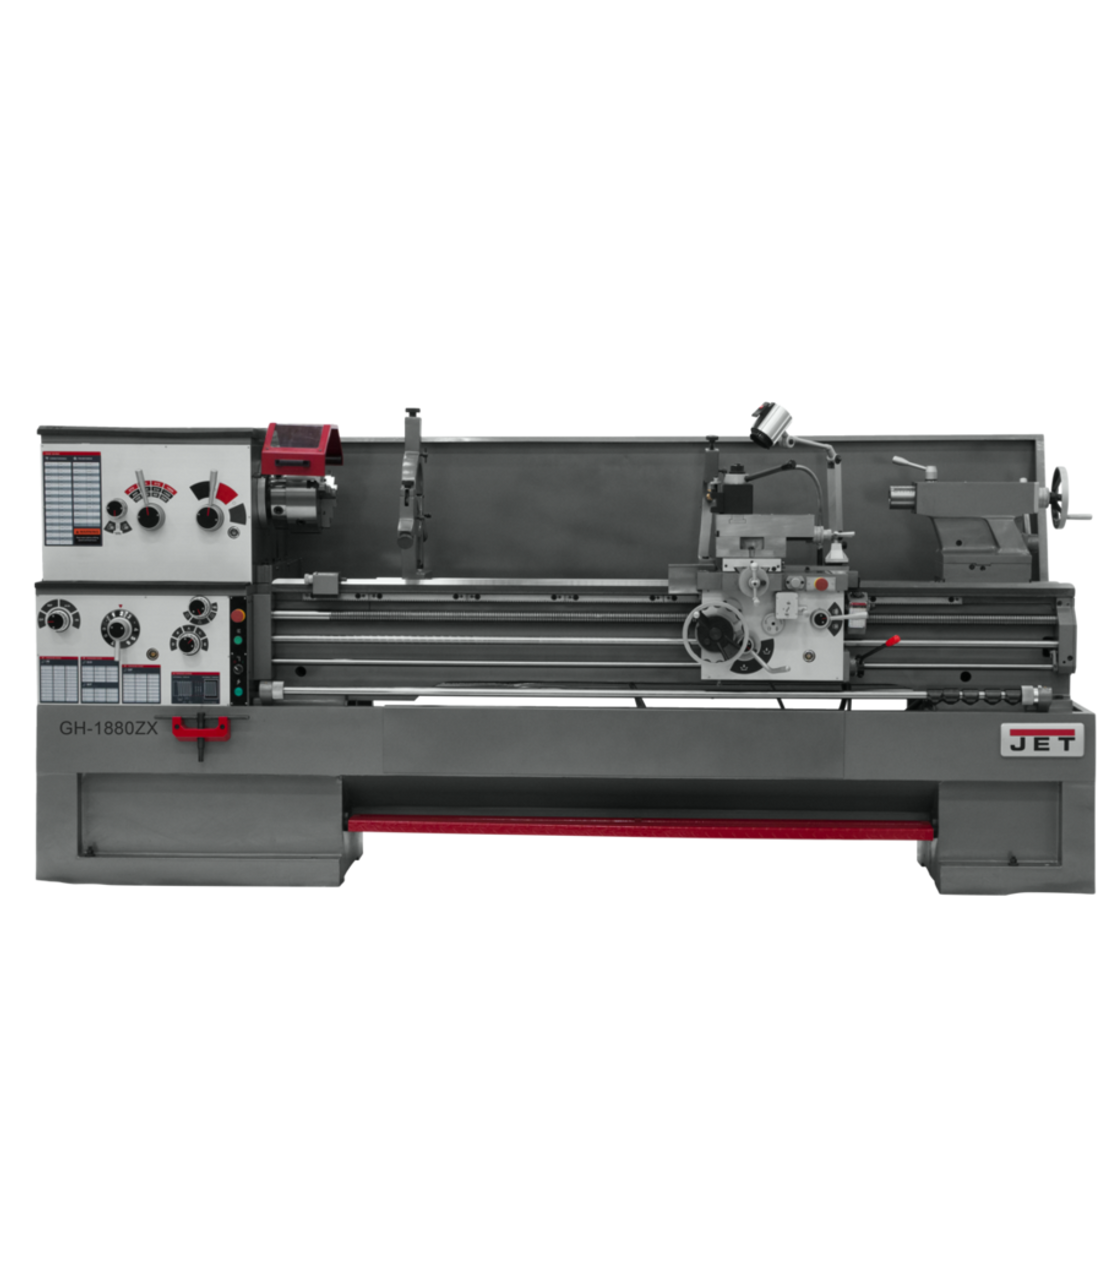 JET GH-1880ZX Large Spindle Bore Lathe with ACU-RITE 203 DRO 460V